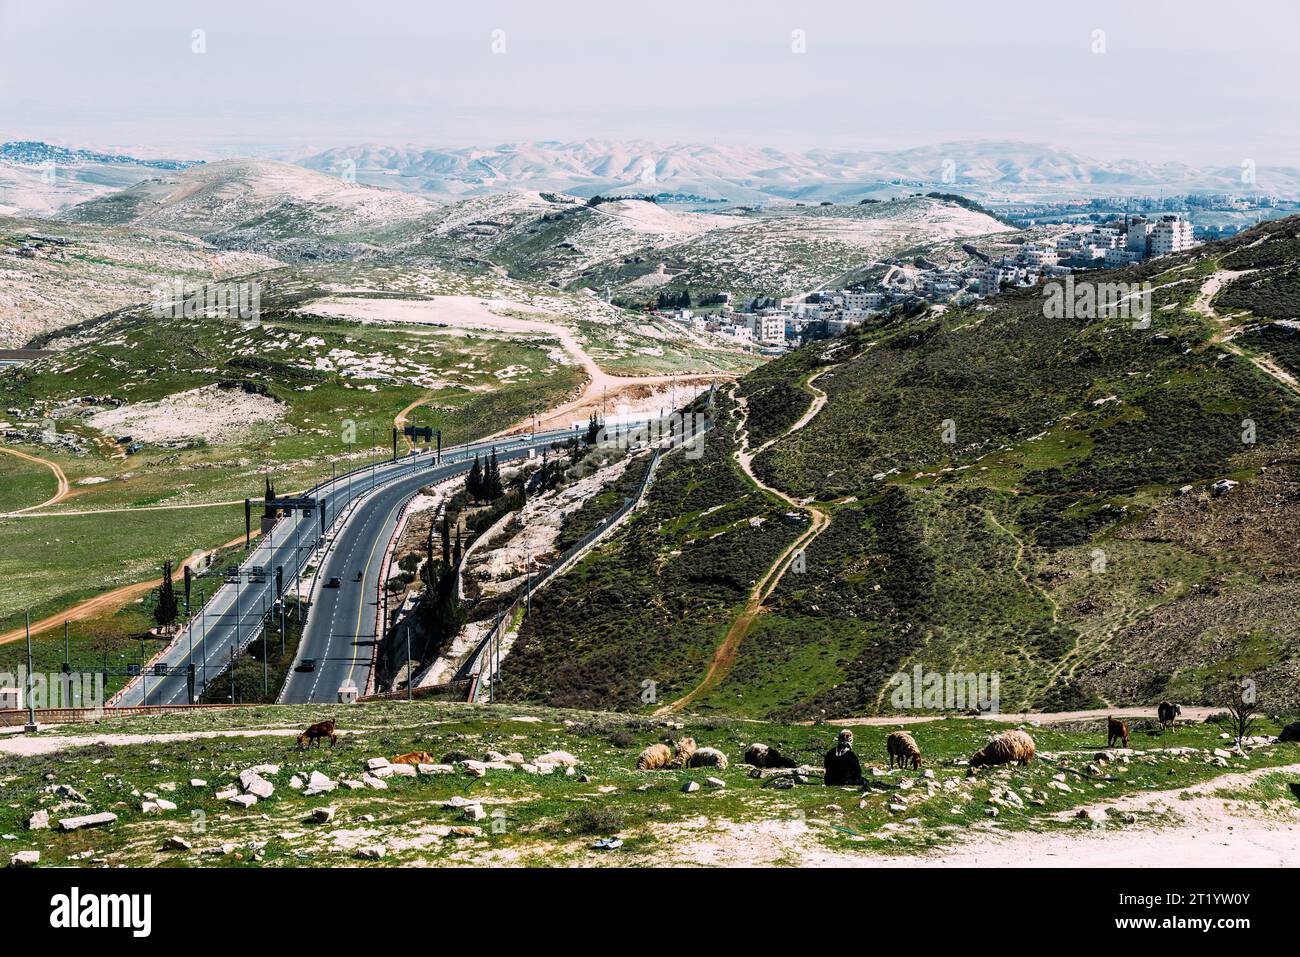 Hills with sheep surrounding Jerusalem looking towards the Palestinian Territories, Middle East Stock Photo